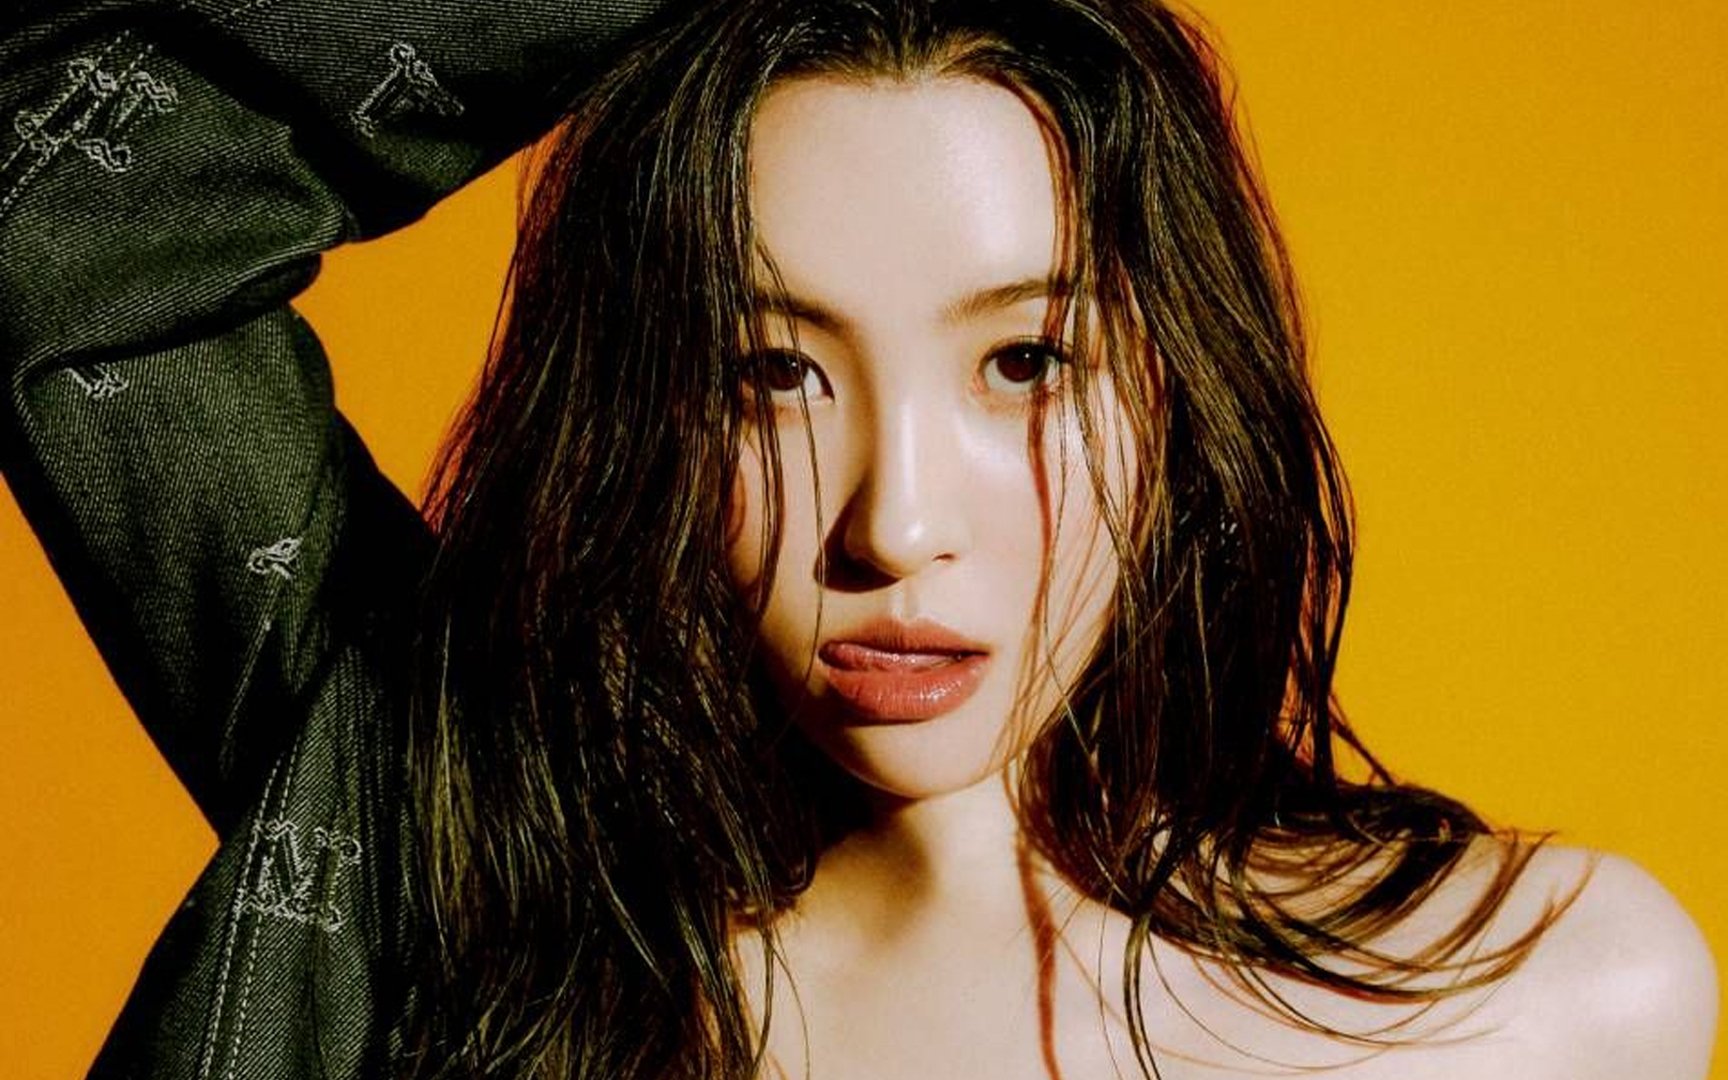 Sunmi meets with 'Marie Claire' and reflects on her 15 years in the music industry | allkpop